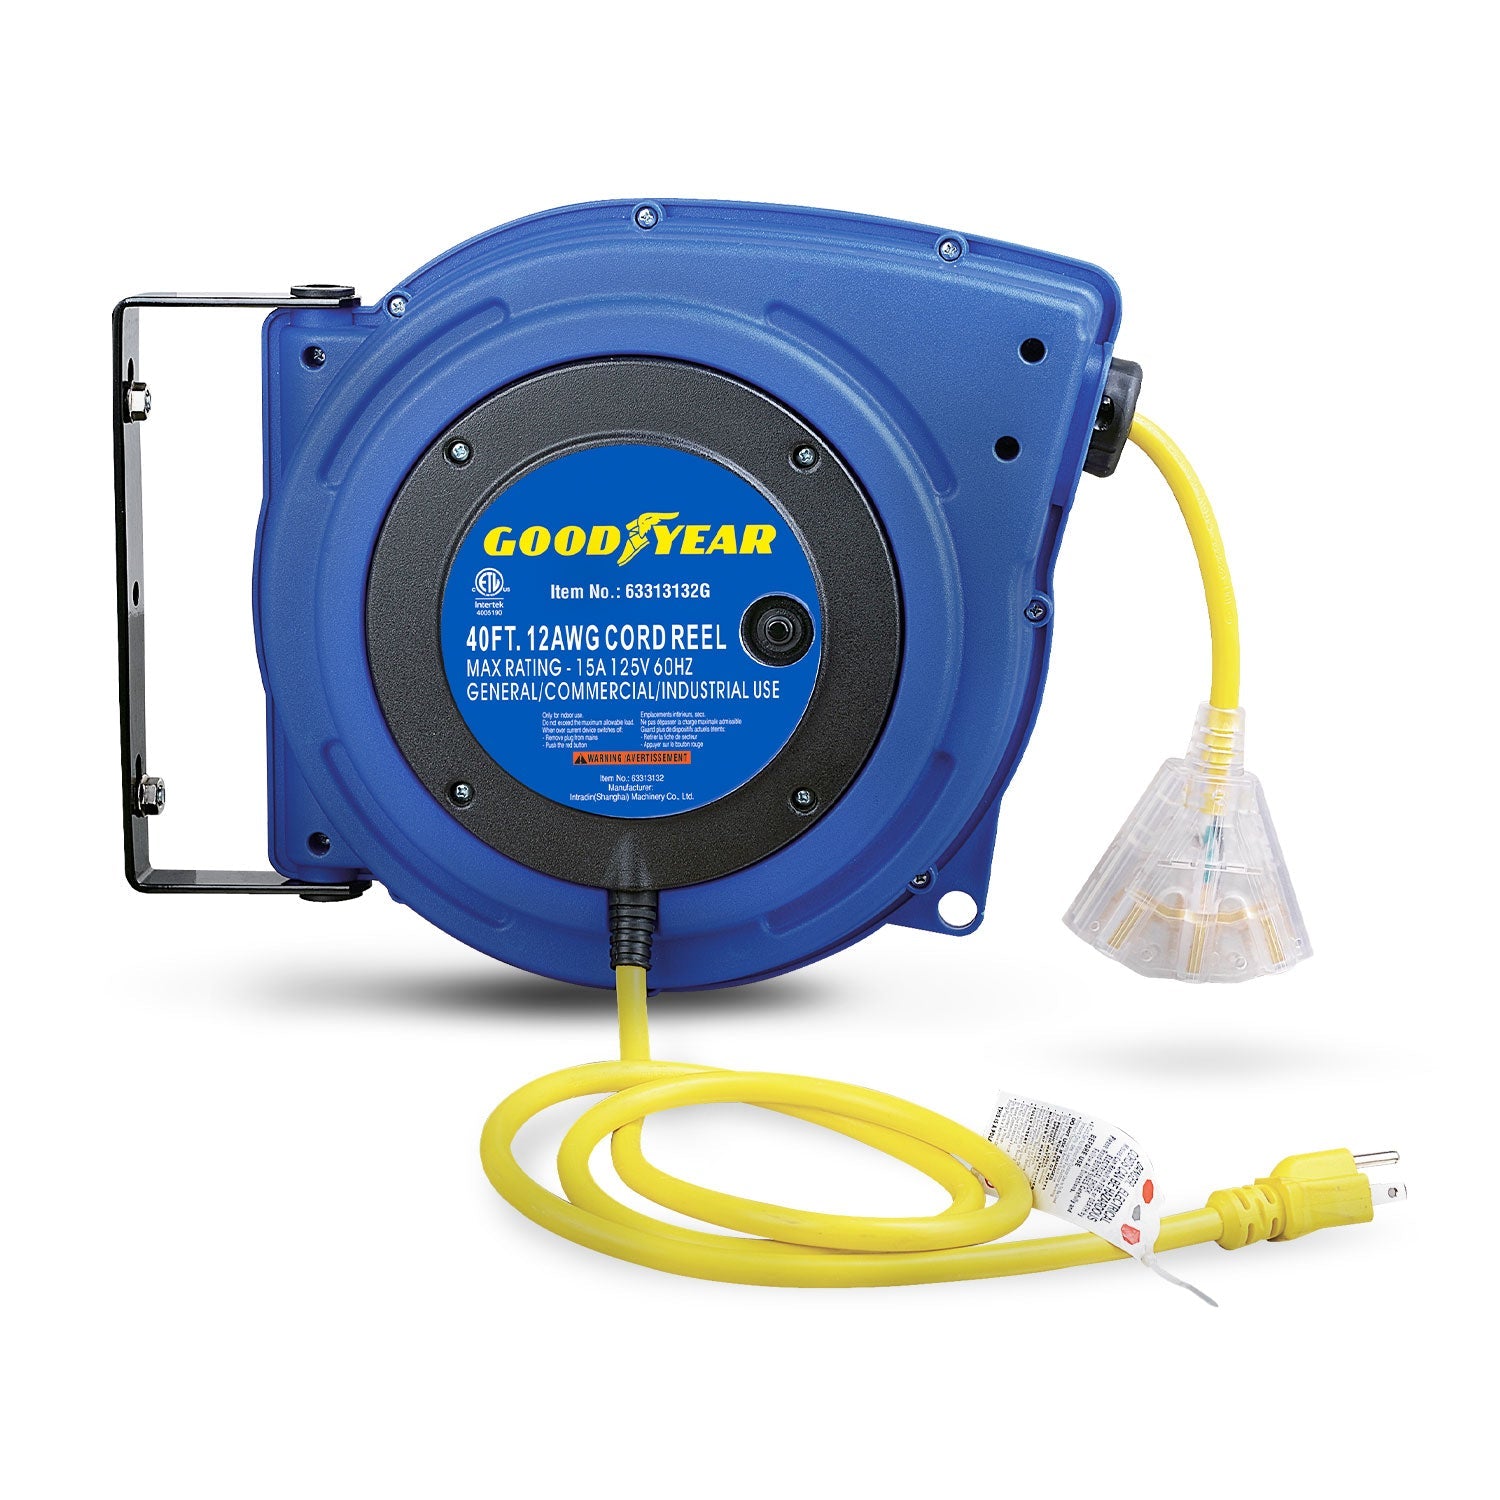 Goodyear Mountable Retractable Extension Cord Reel - 12AWG x 40' Ft, 3 Grounded Outlets, Max 15A